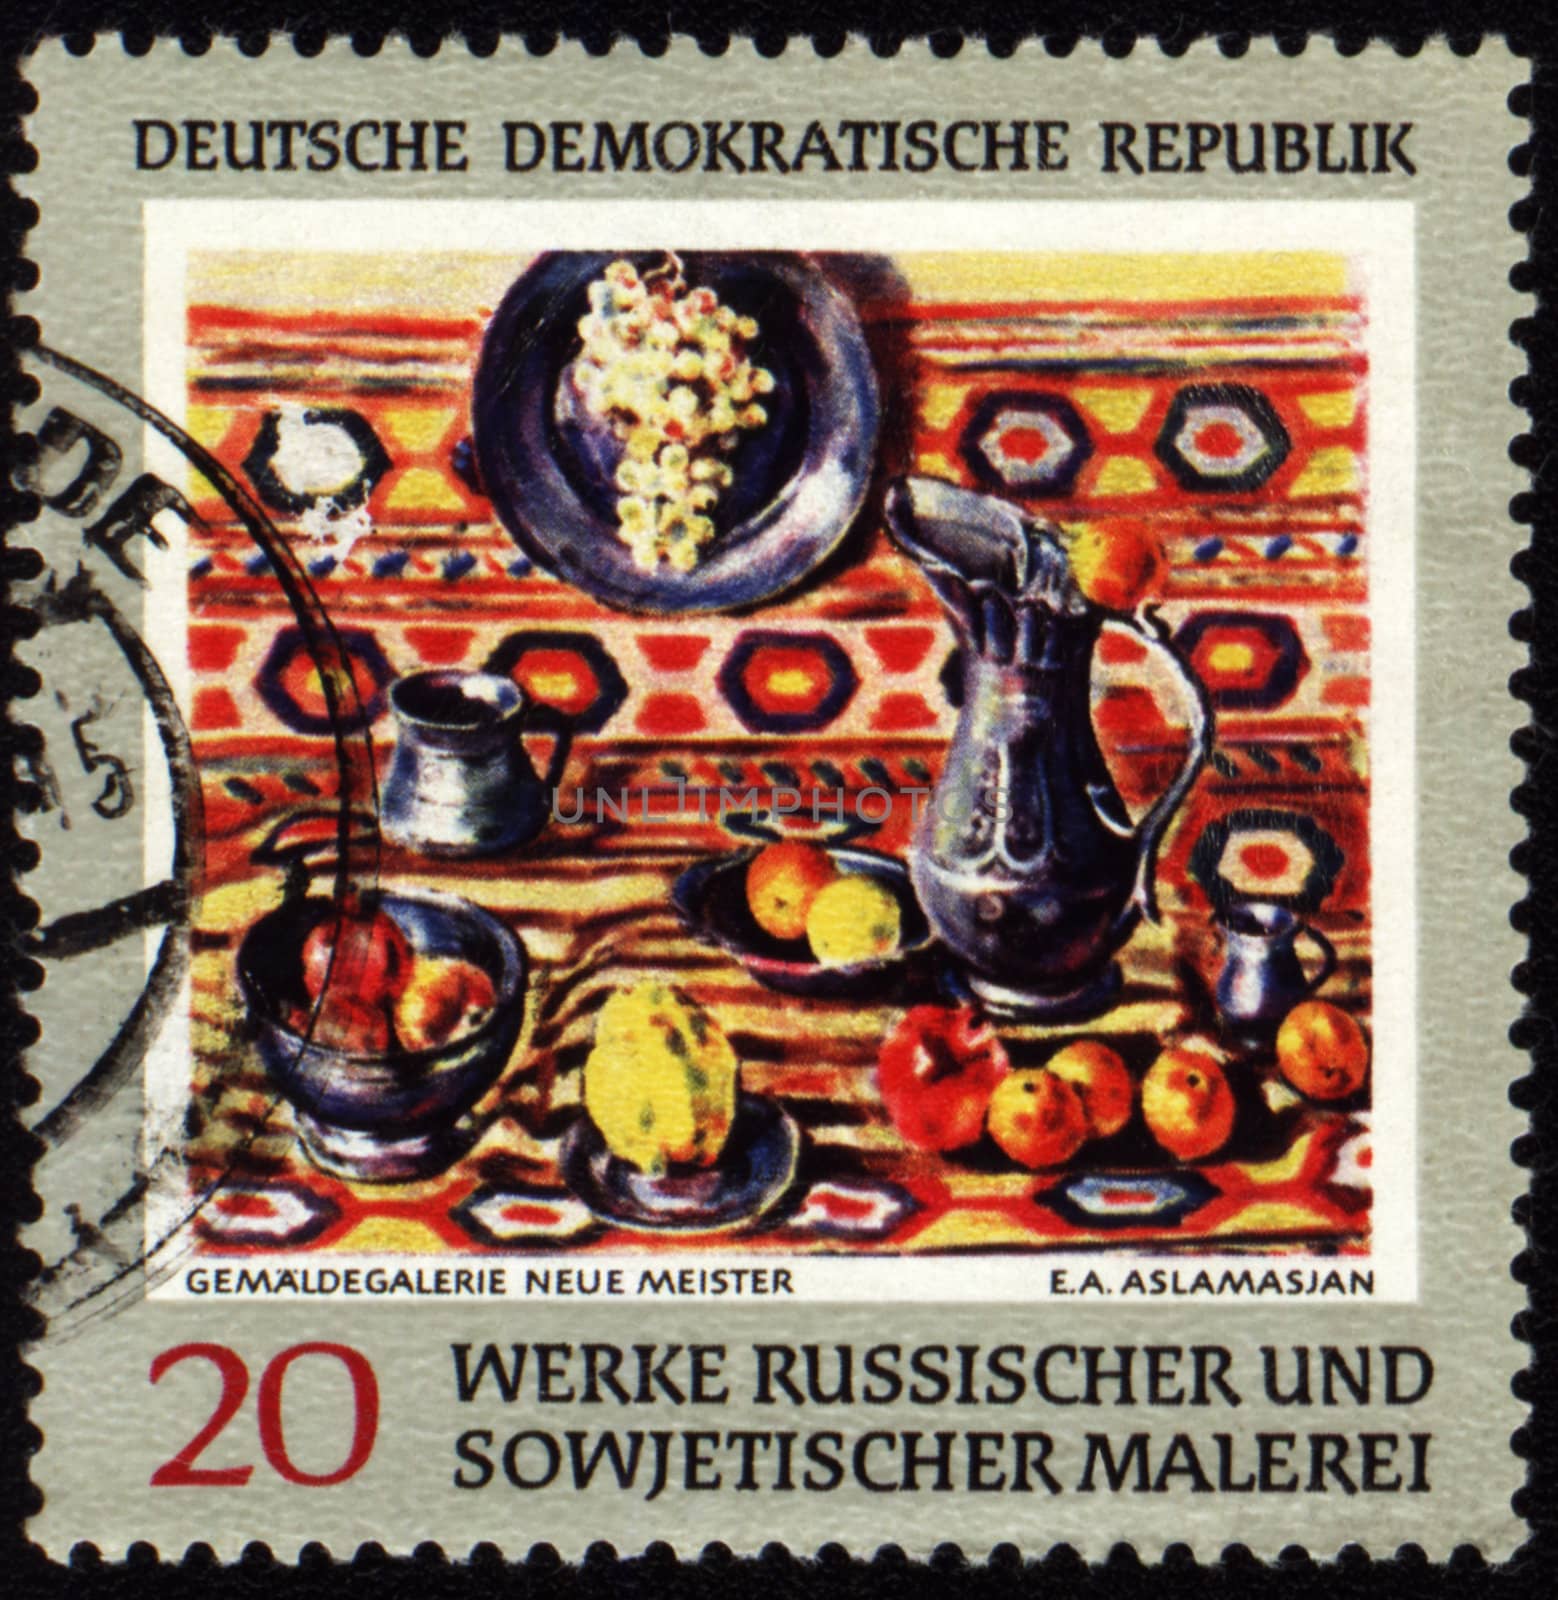 GDR - CIRCA 1960s: A stamp printed in GDR (East Germany) shows picture of a Soviet artist Aslamasyan, circa 1960s